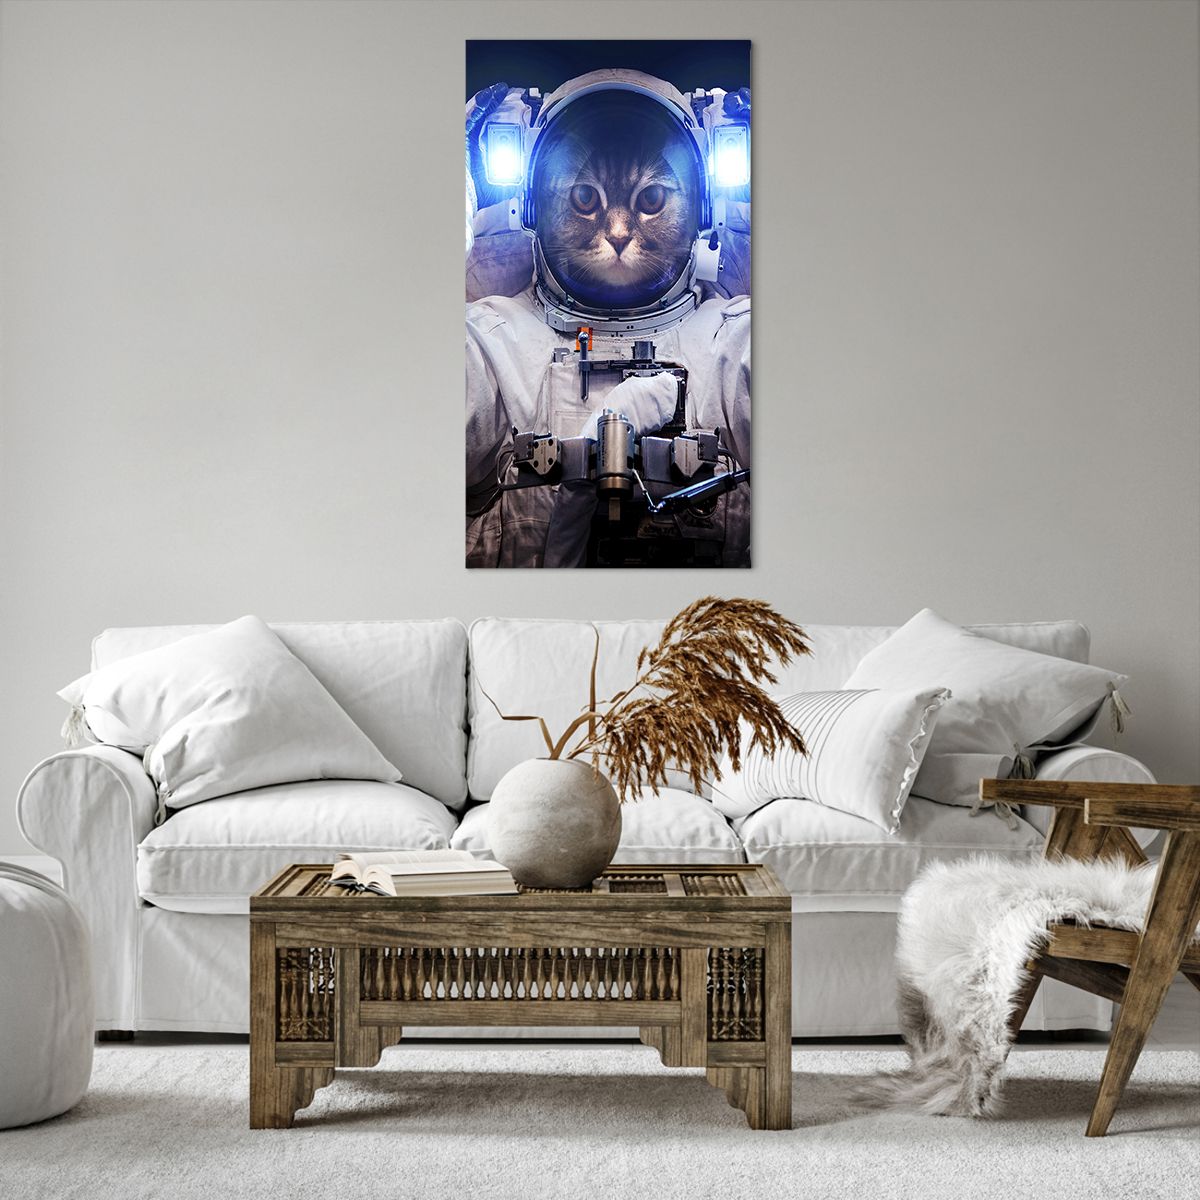 Impression sur toile Abstraction, Impression sur toile Astronaute, Impression sur toile Cosmos, Impression sur toile Art, Impression sur toile Chat